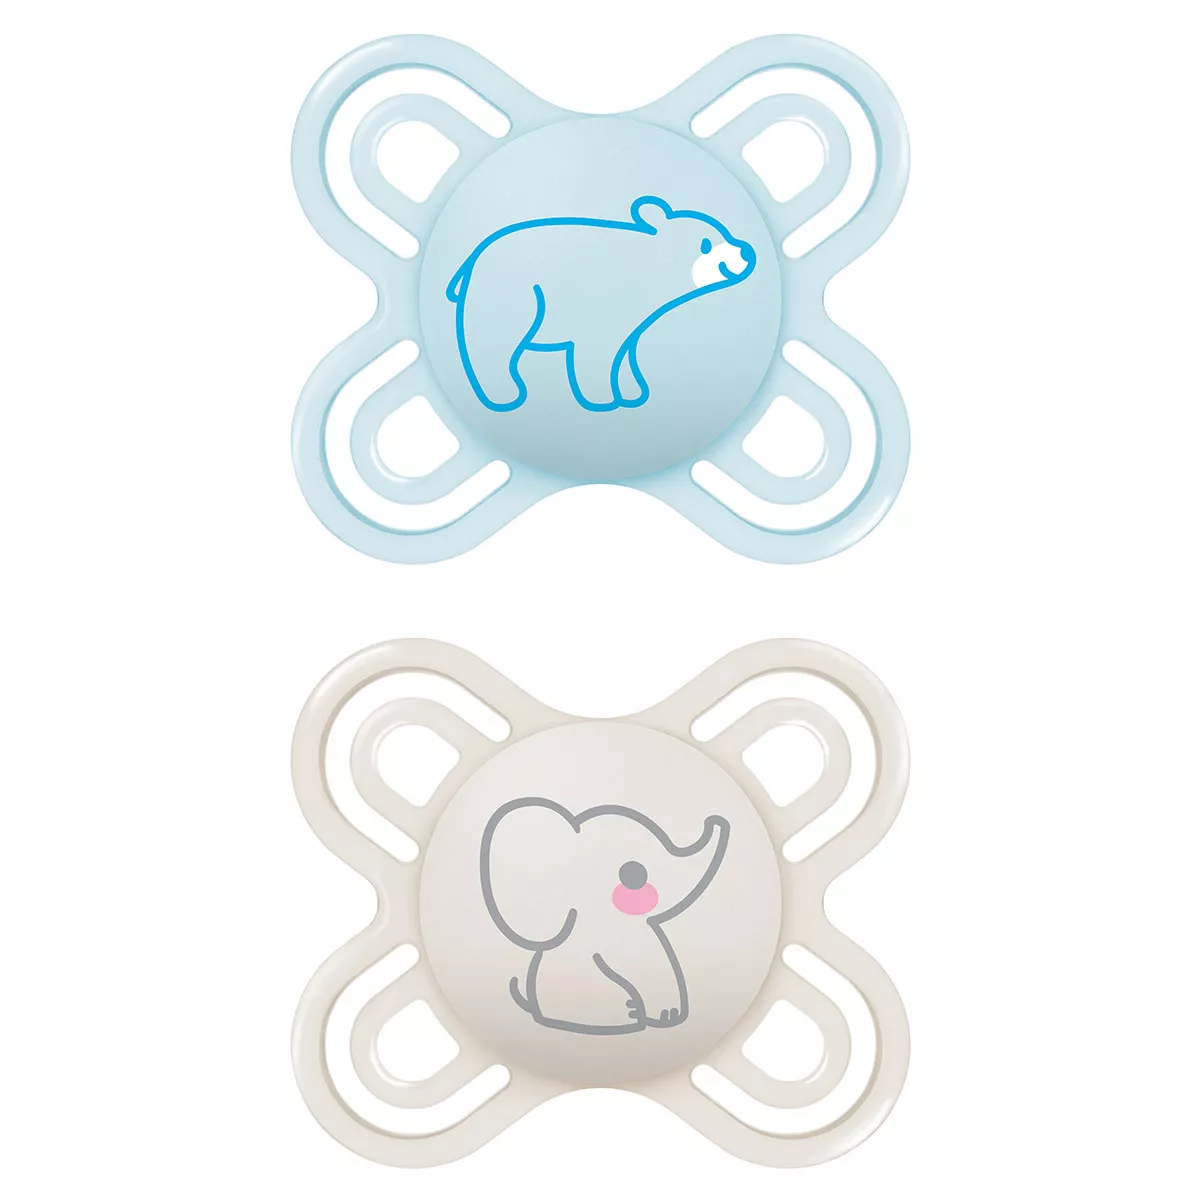 MAM Perfect Start Soother 0-2 months, set of 2